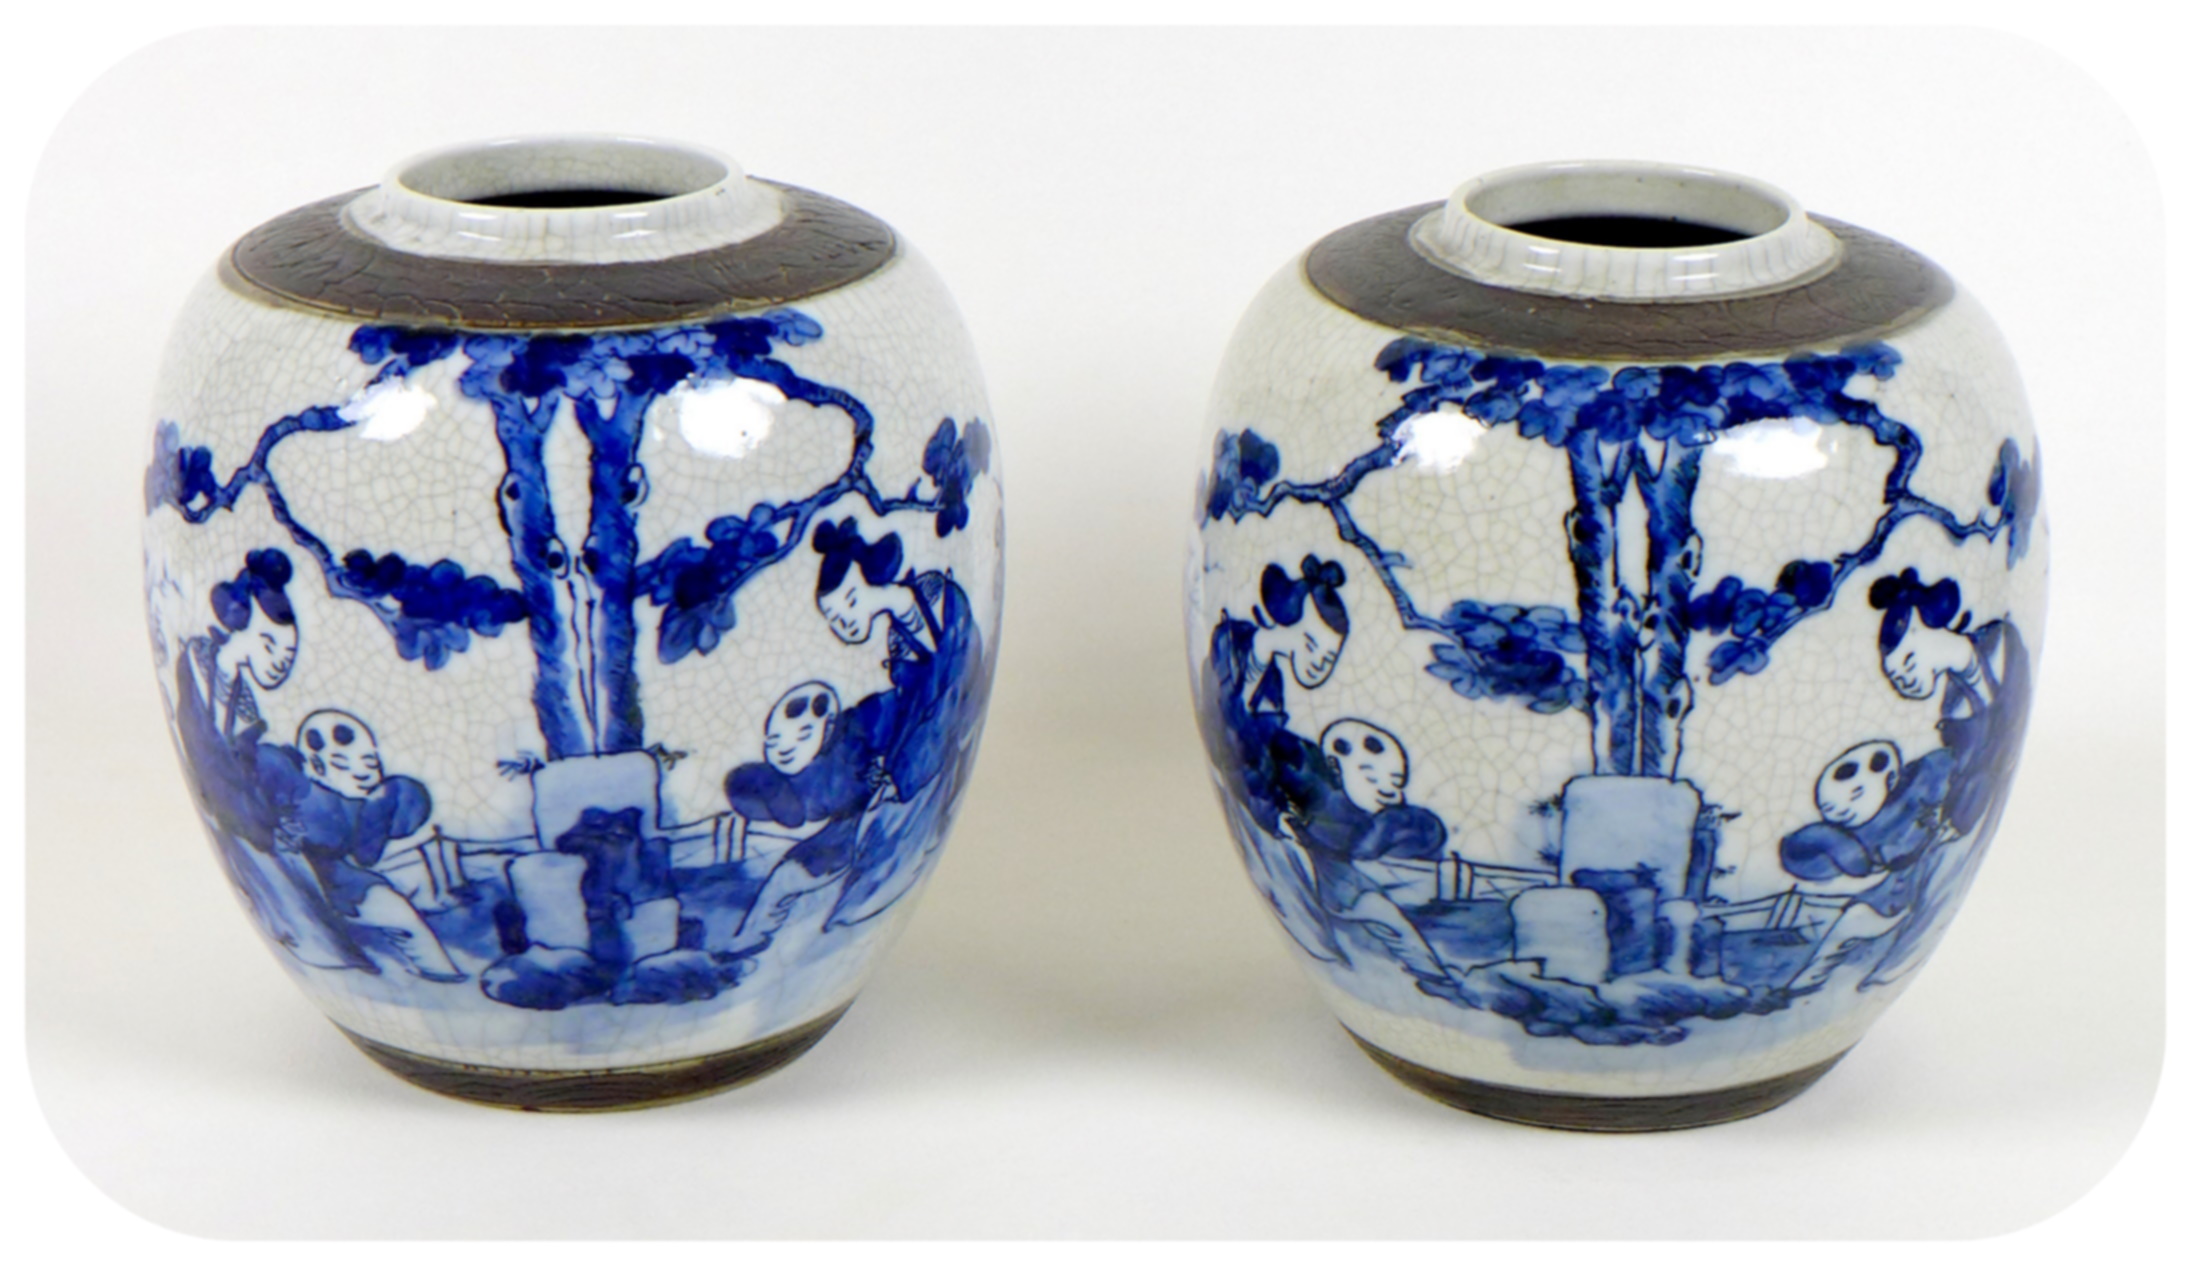 A pair of Chinese porcelain ginger jars, early to mid 20th century, decorated with two women each